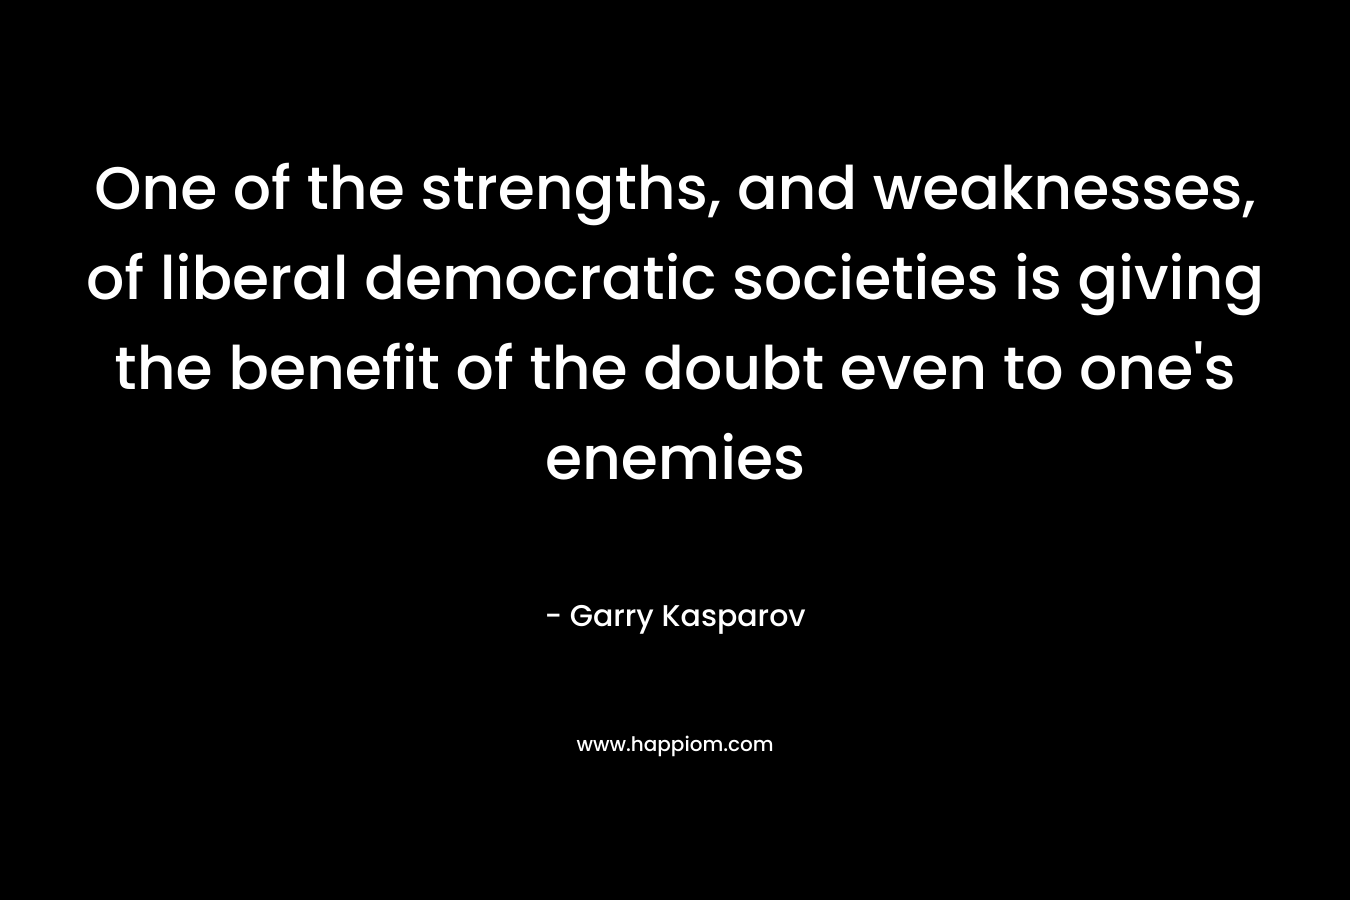 One of the strengths, and weaknesses, of liberal democratic societies is giving the benefit of the doubt even to one's enemies